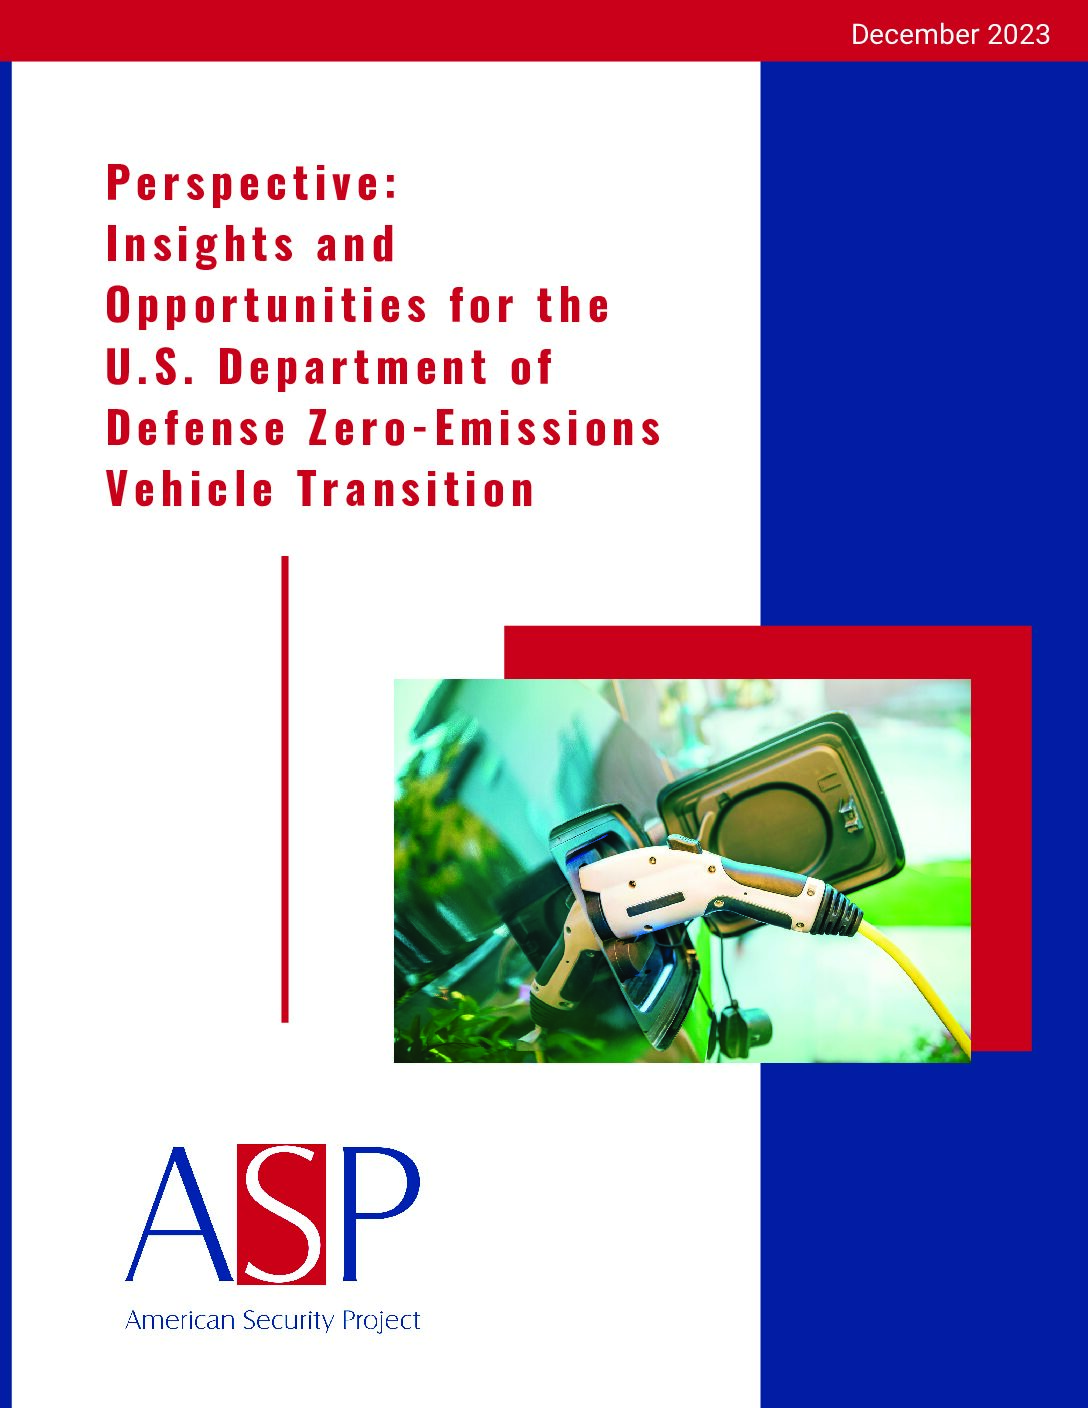 Perspective – Insights and Opportunities for the U.S. Department of Defense Zero-Emissions Vehicle Fleet Transition